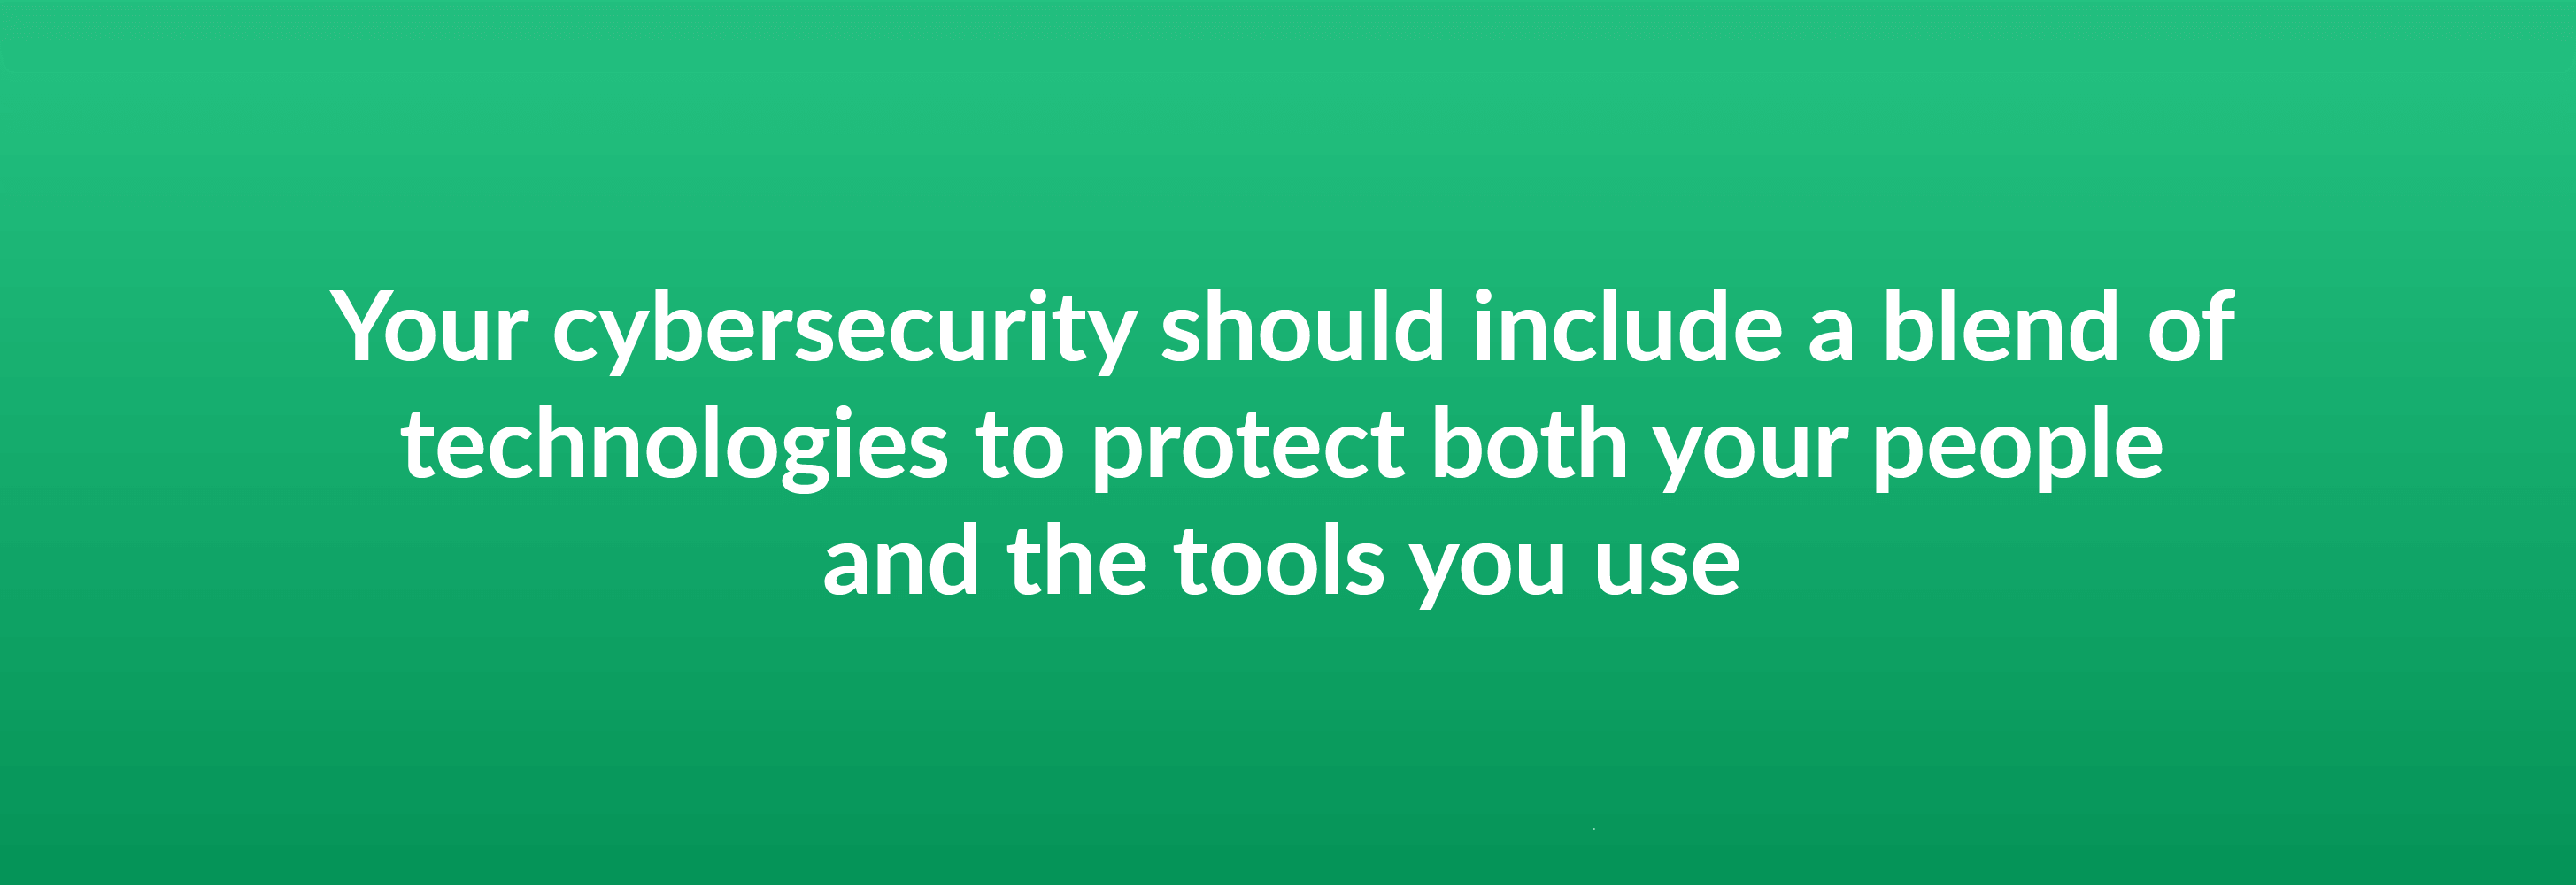 Your cybersecurity should include a blend of technologies to protect both your people and the tools you use